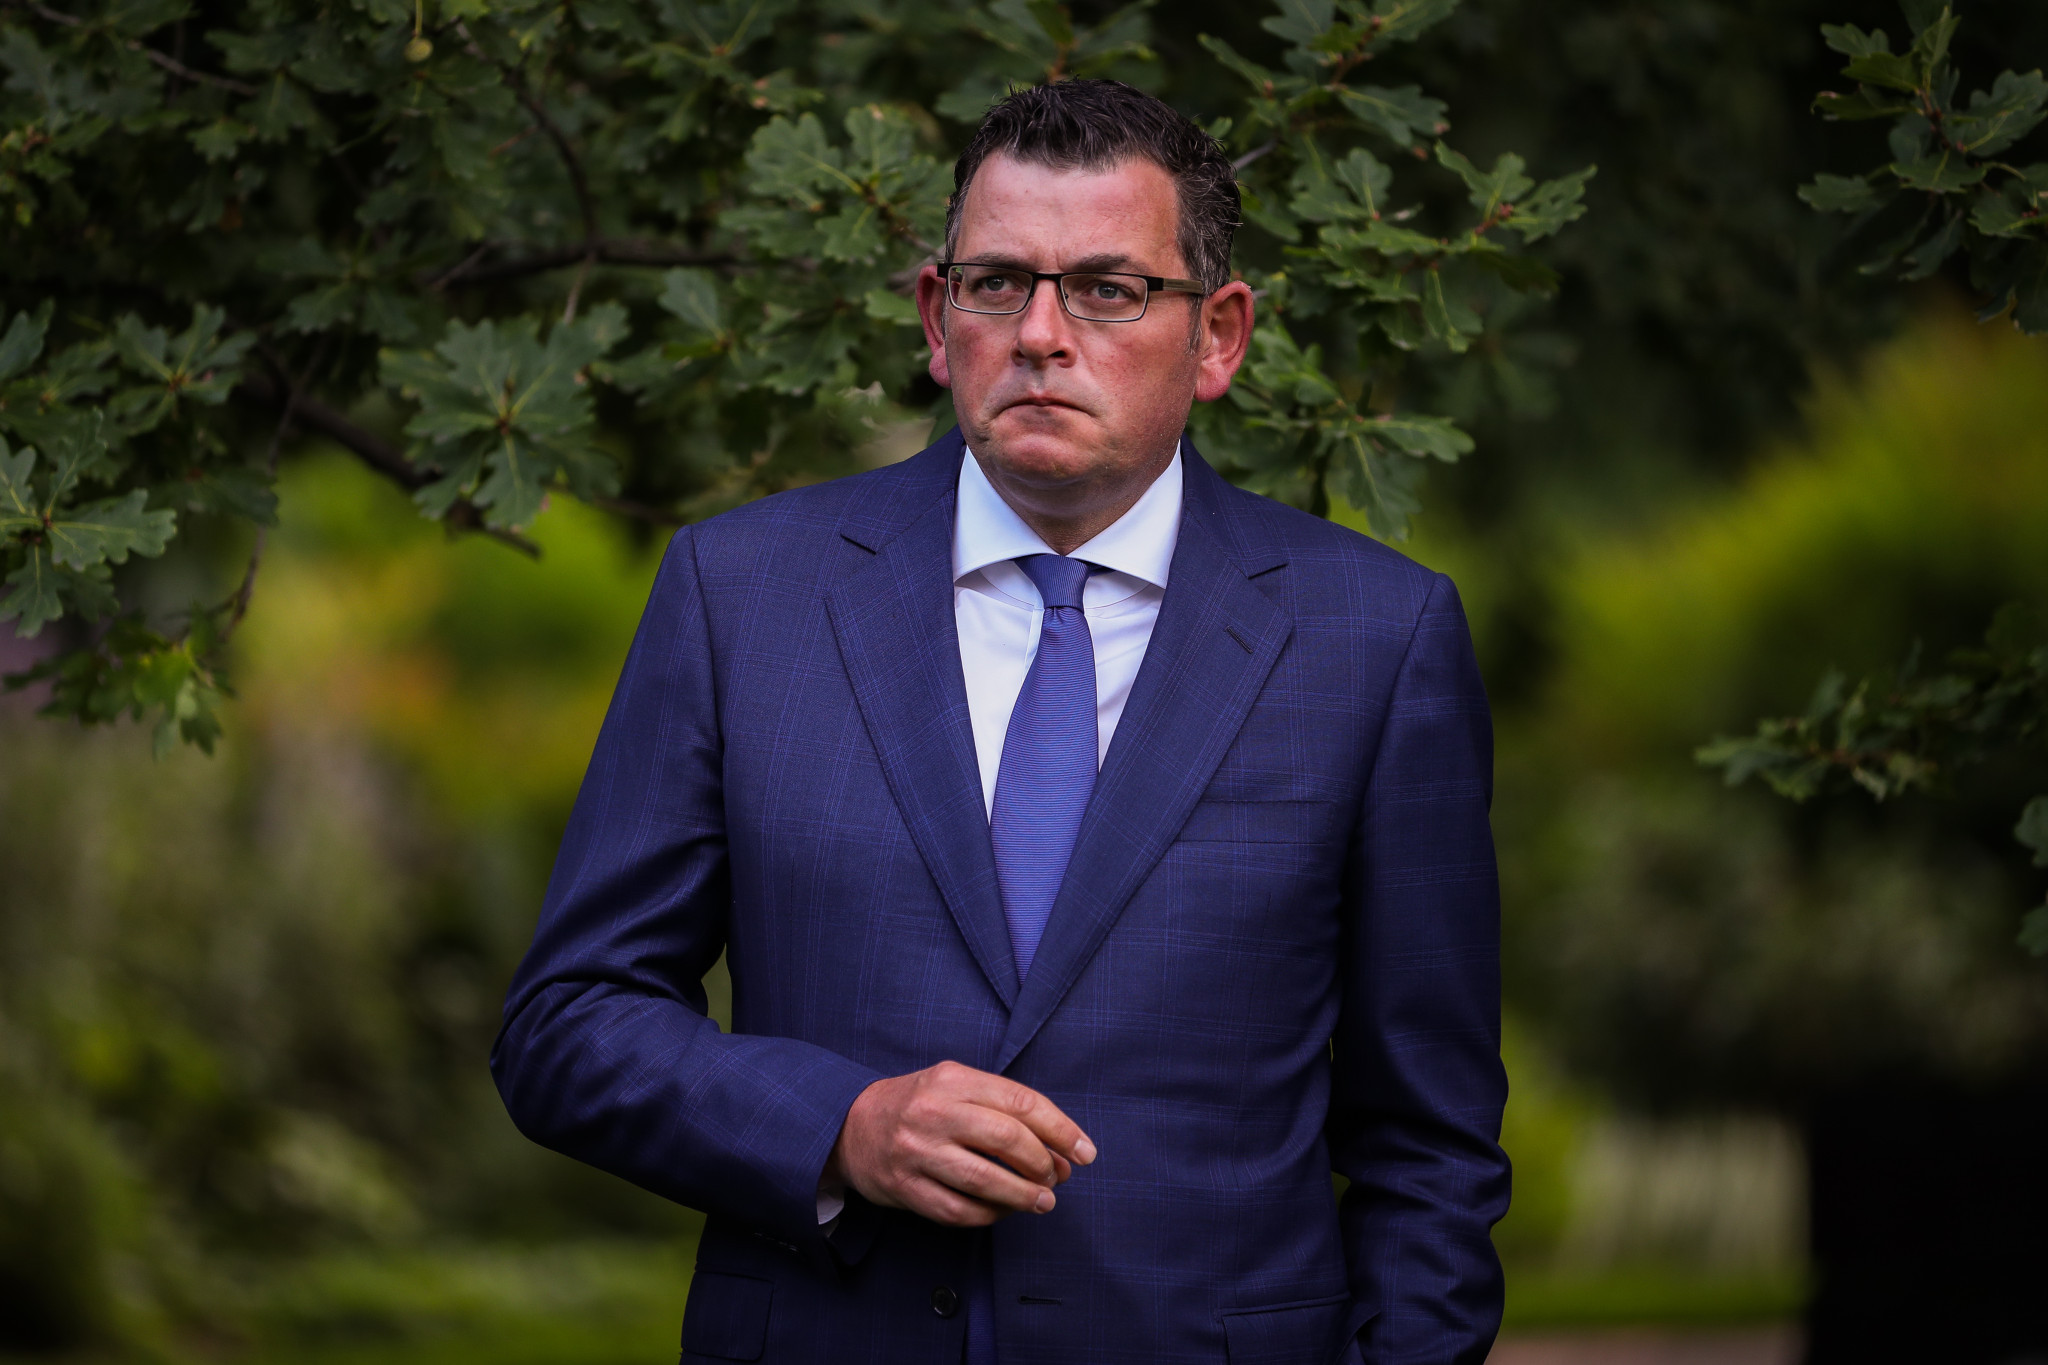 Daniel Andrews has announced his resignation as Victoria's Premier, following a nine-year tenure in the role ©Getty Images